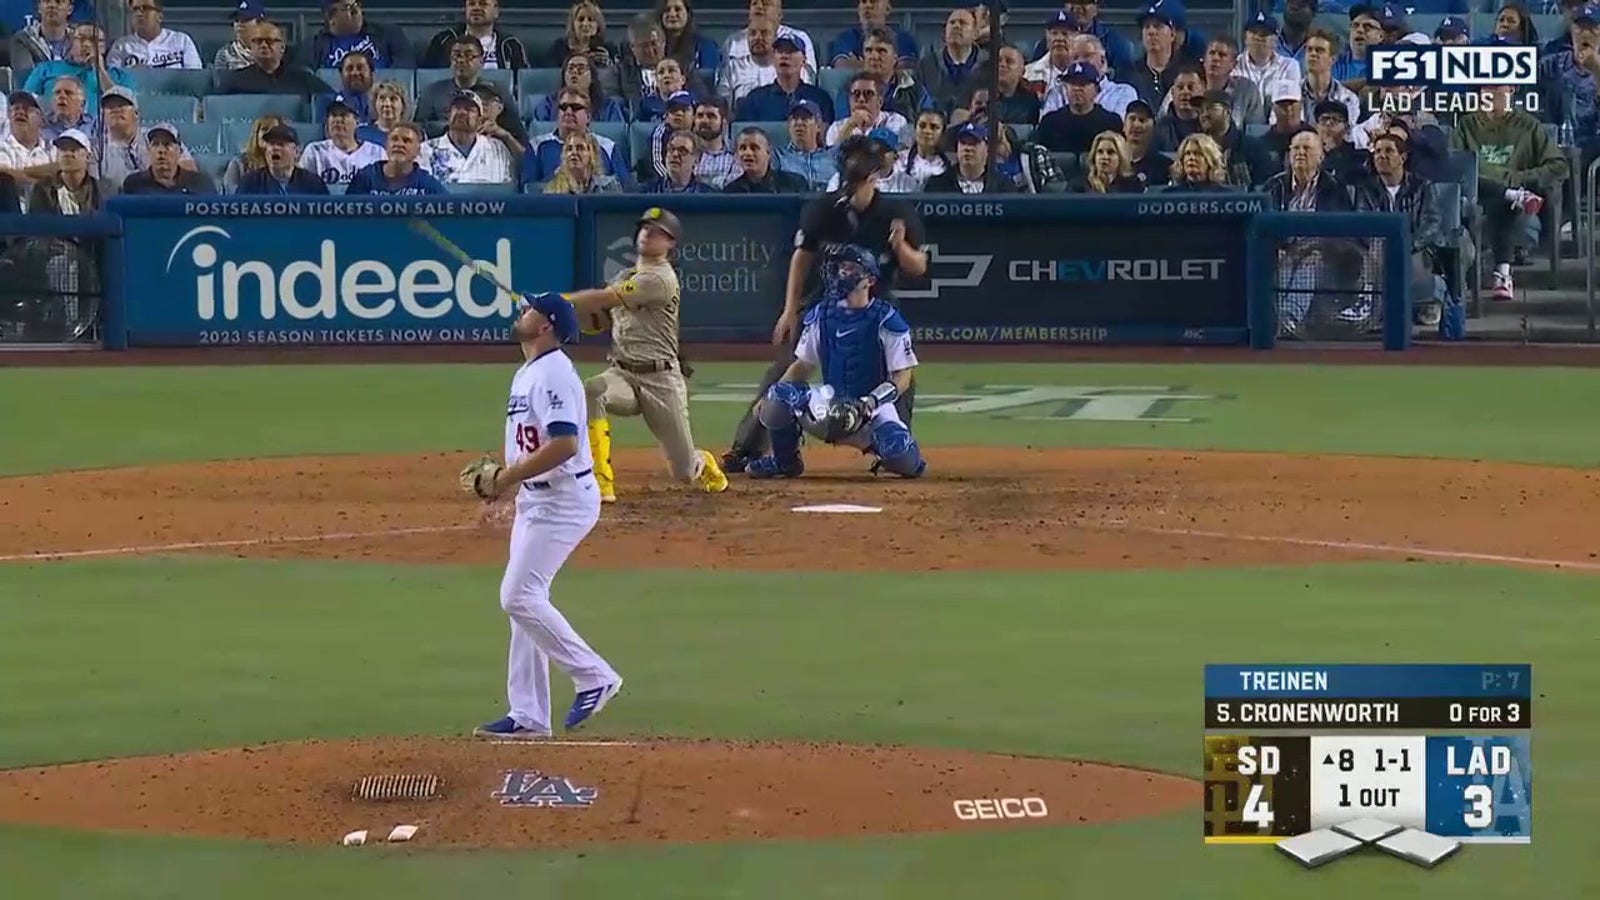 Jake Cronenworth blasts a home run to extend lead over Dodgers